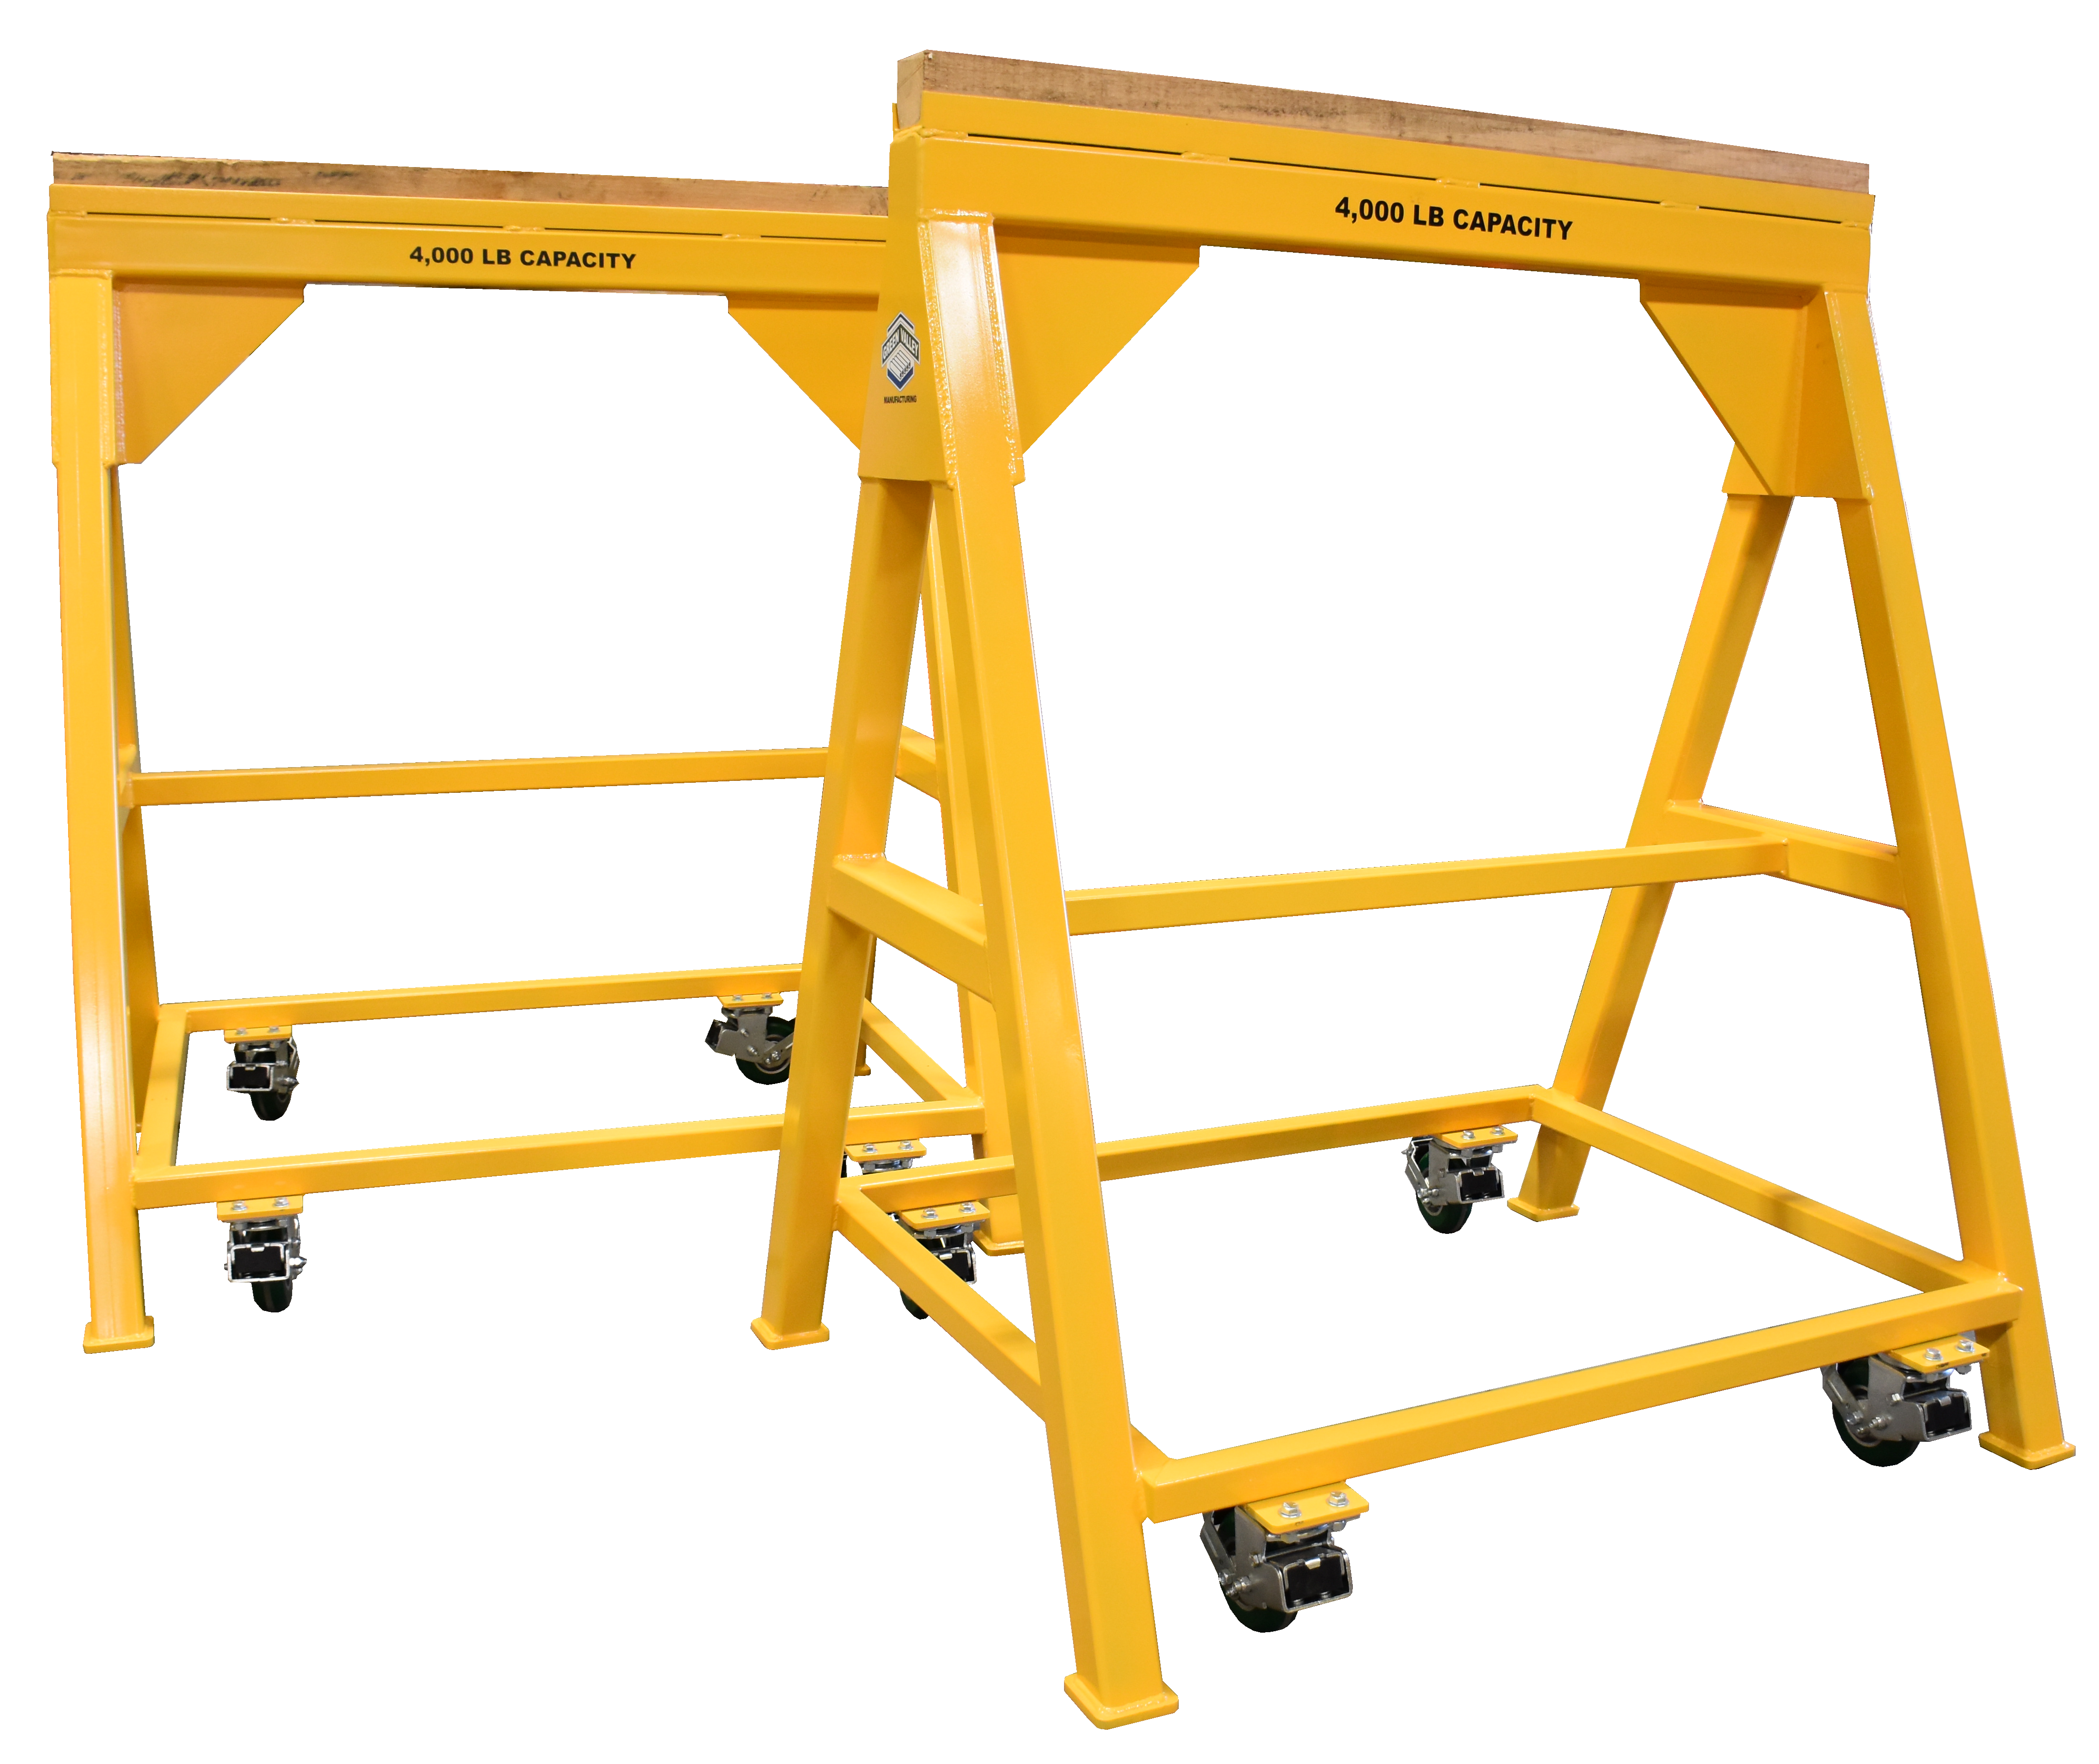 Heavy Duty Industrial steel sawhorse4,000 LB. Wood Top Spring Loaded Compression Caster (184339)